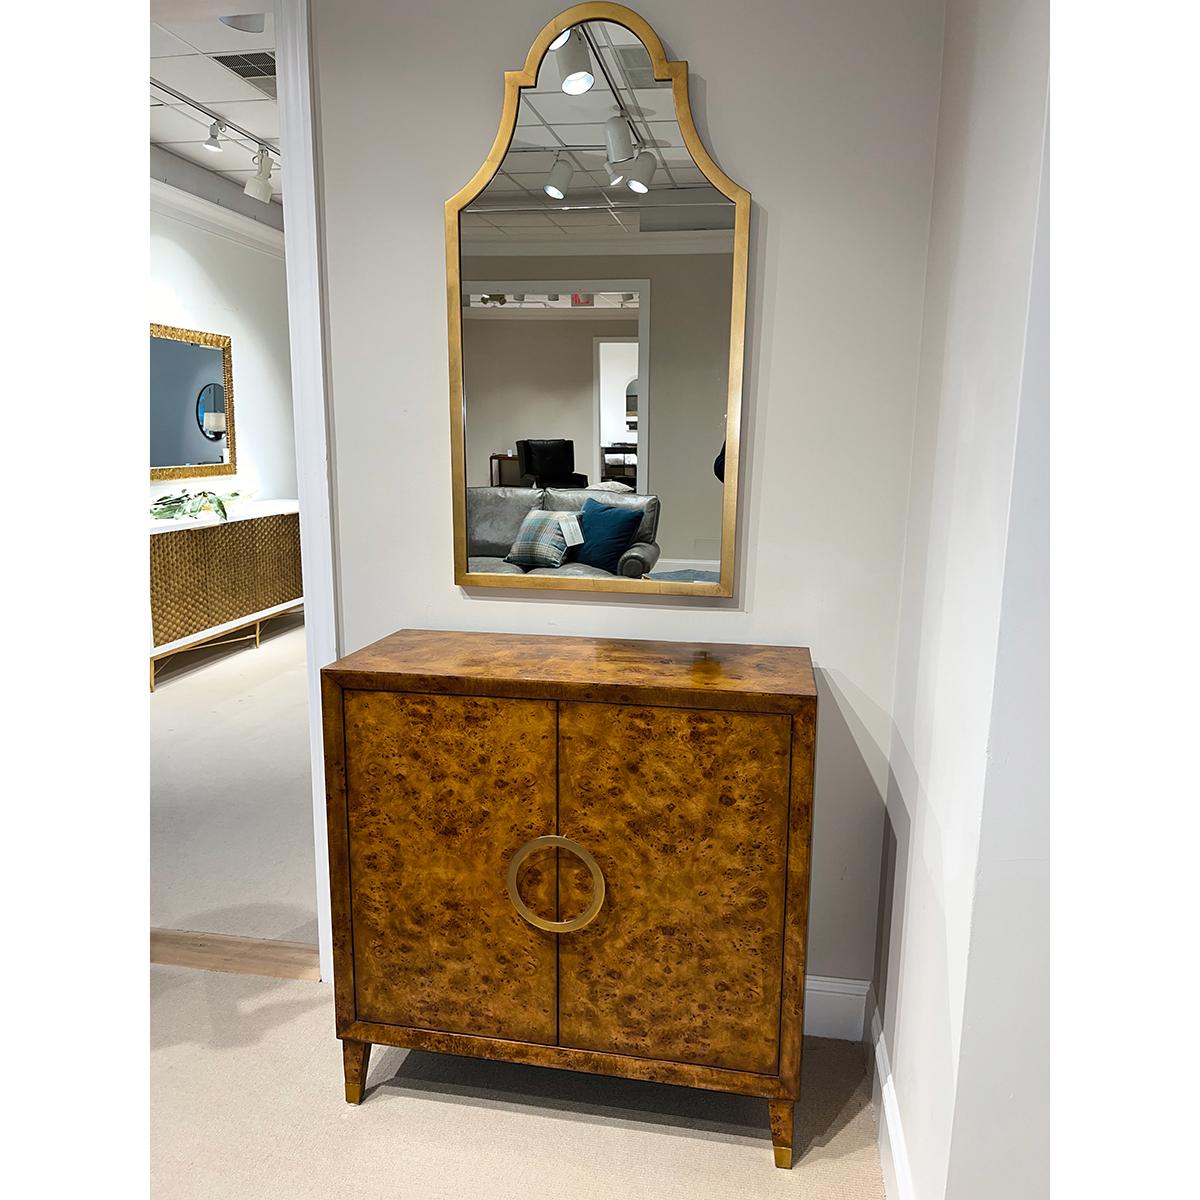 Small midcentury Burl Cabinet with a warm 'rustic' hand-rubbed mappa burl veneer, a beveled frame, two doors with a polished brass central round handle, two internal shelves, and raised on square tapered and flared legs.

Dimensions: 36